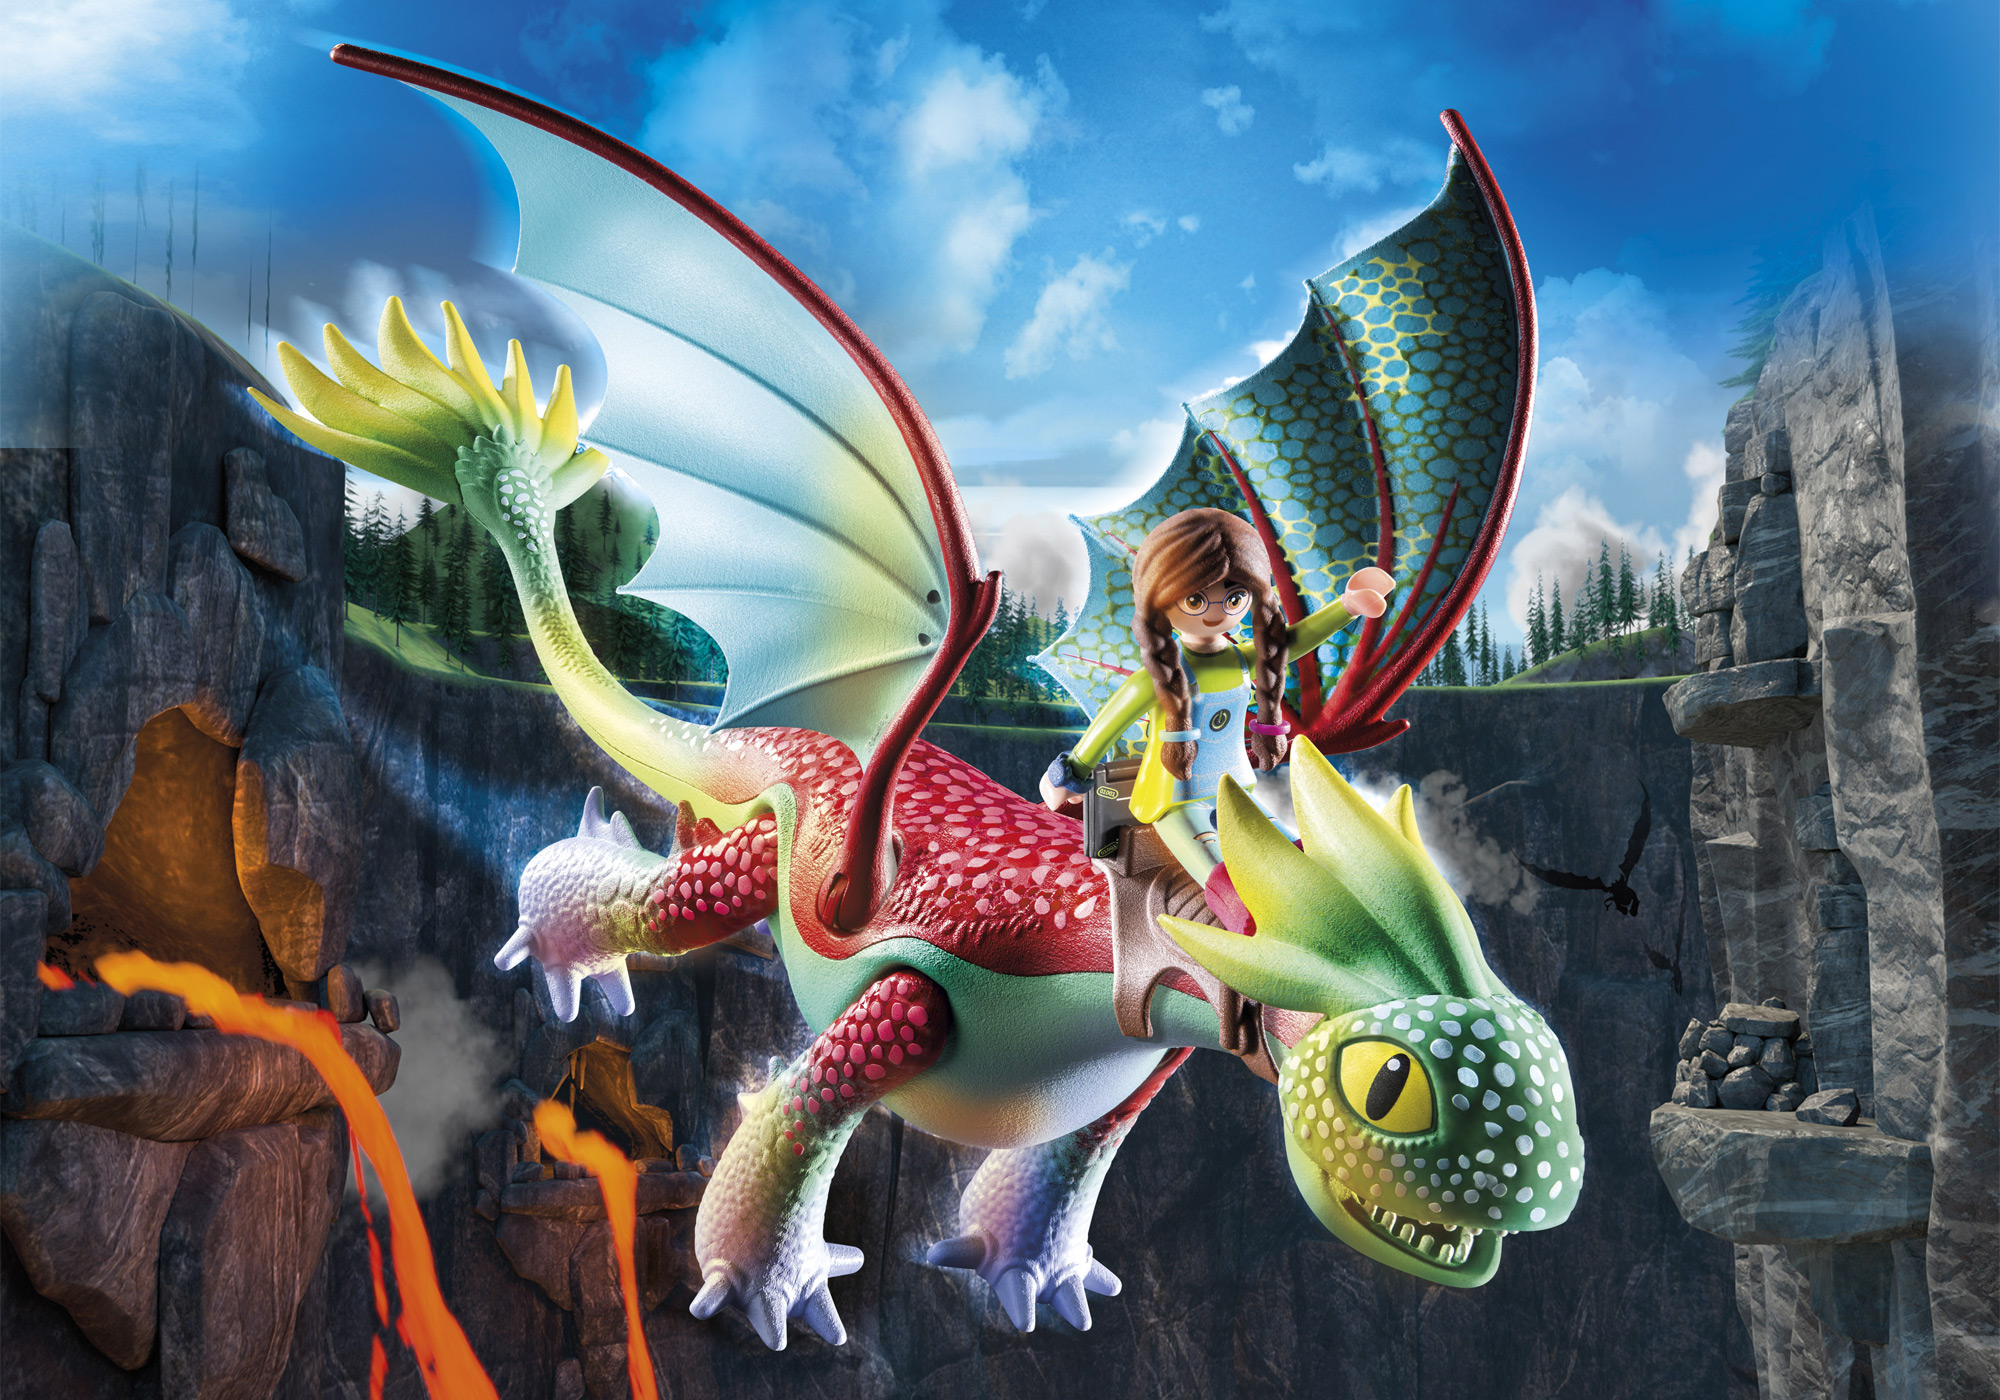 Spielset, Alex Dragons: Nine PLAYMOBIL Realms - Feathers & The Mehrfarbig 71083